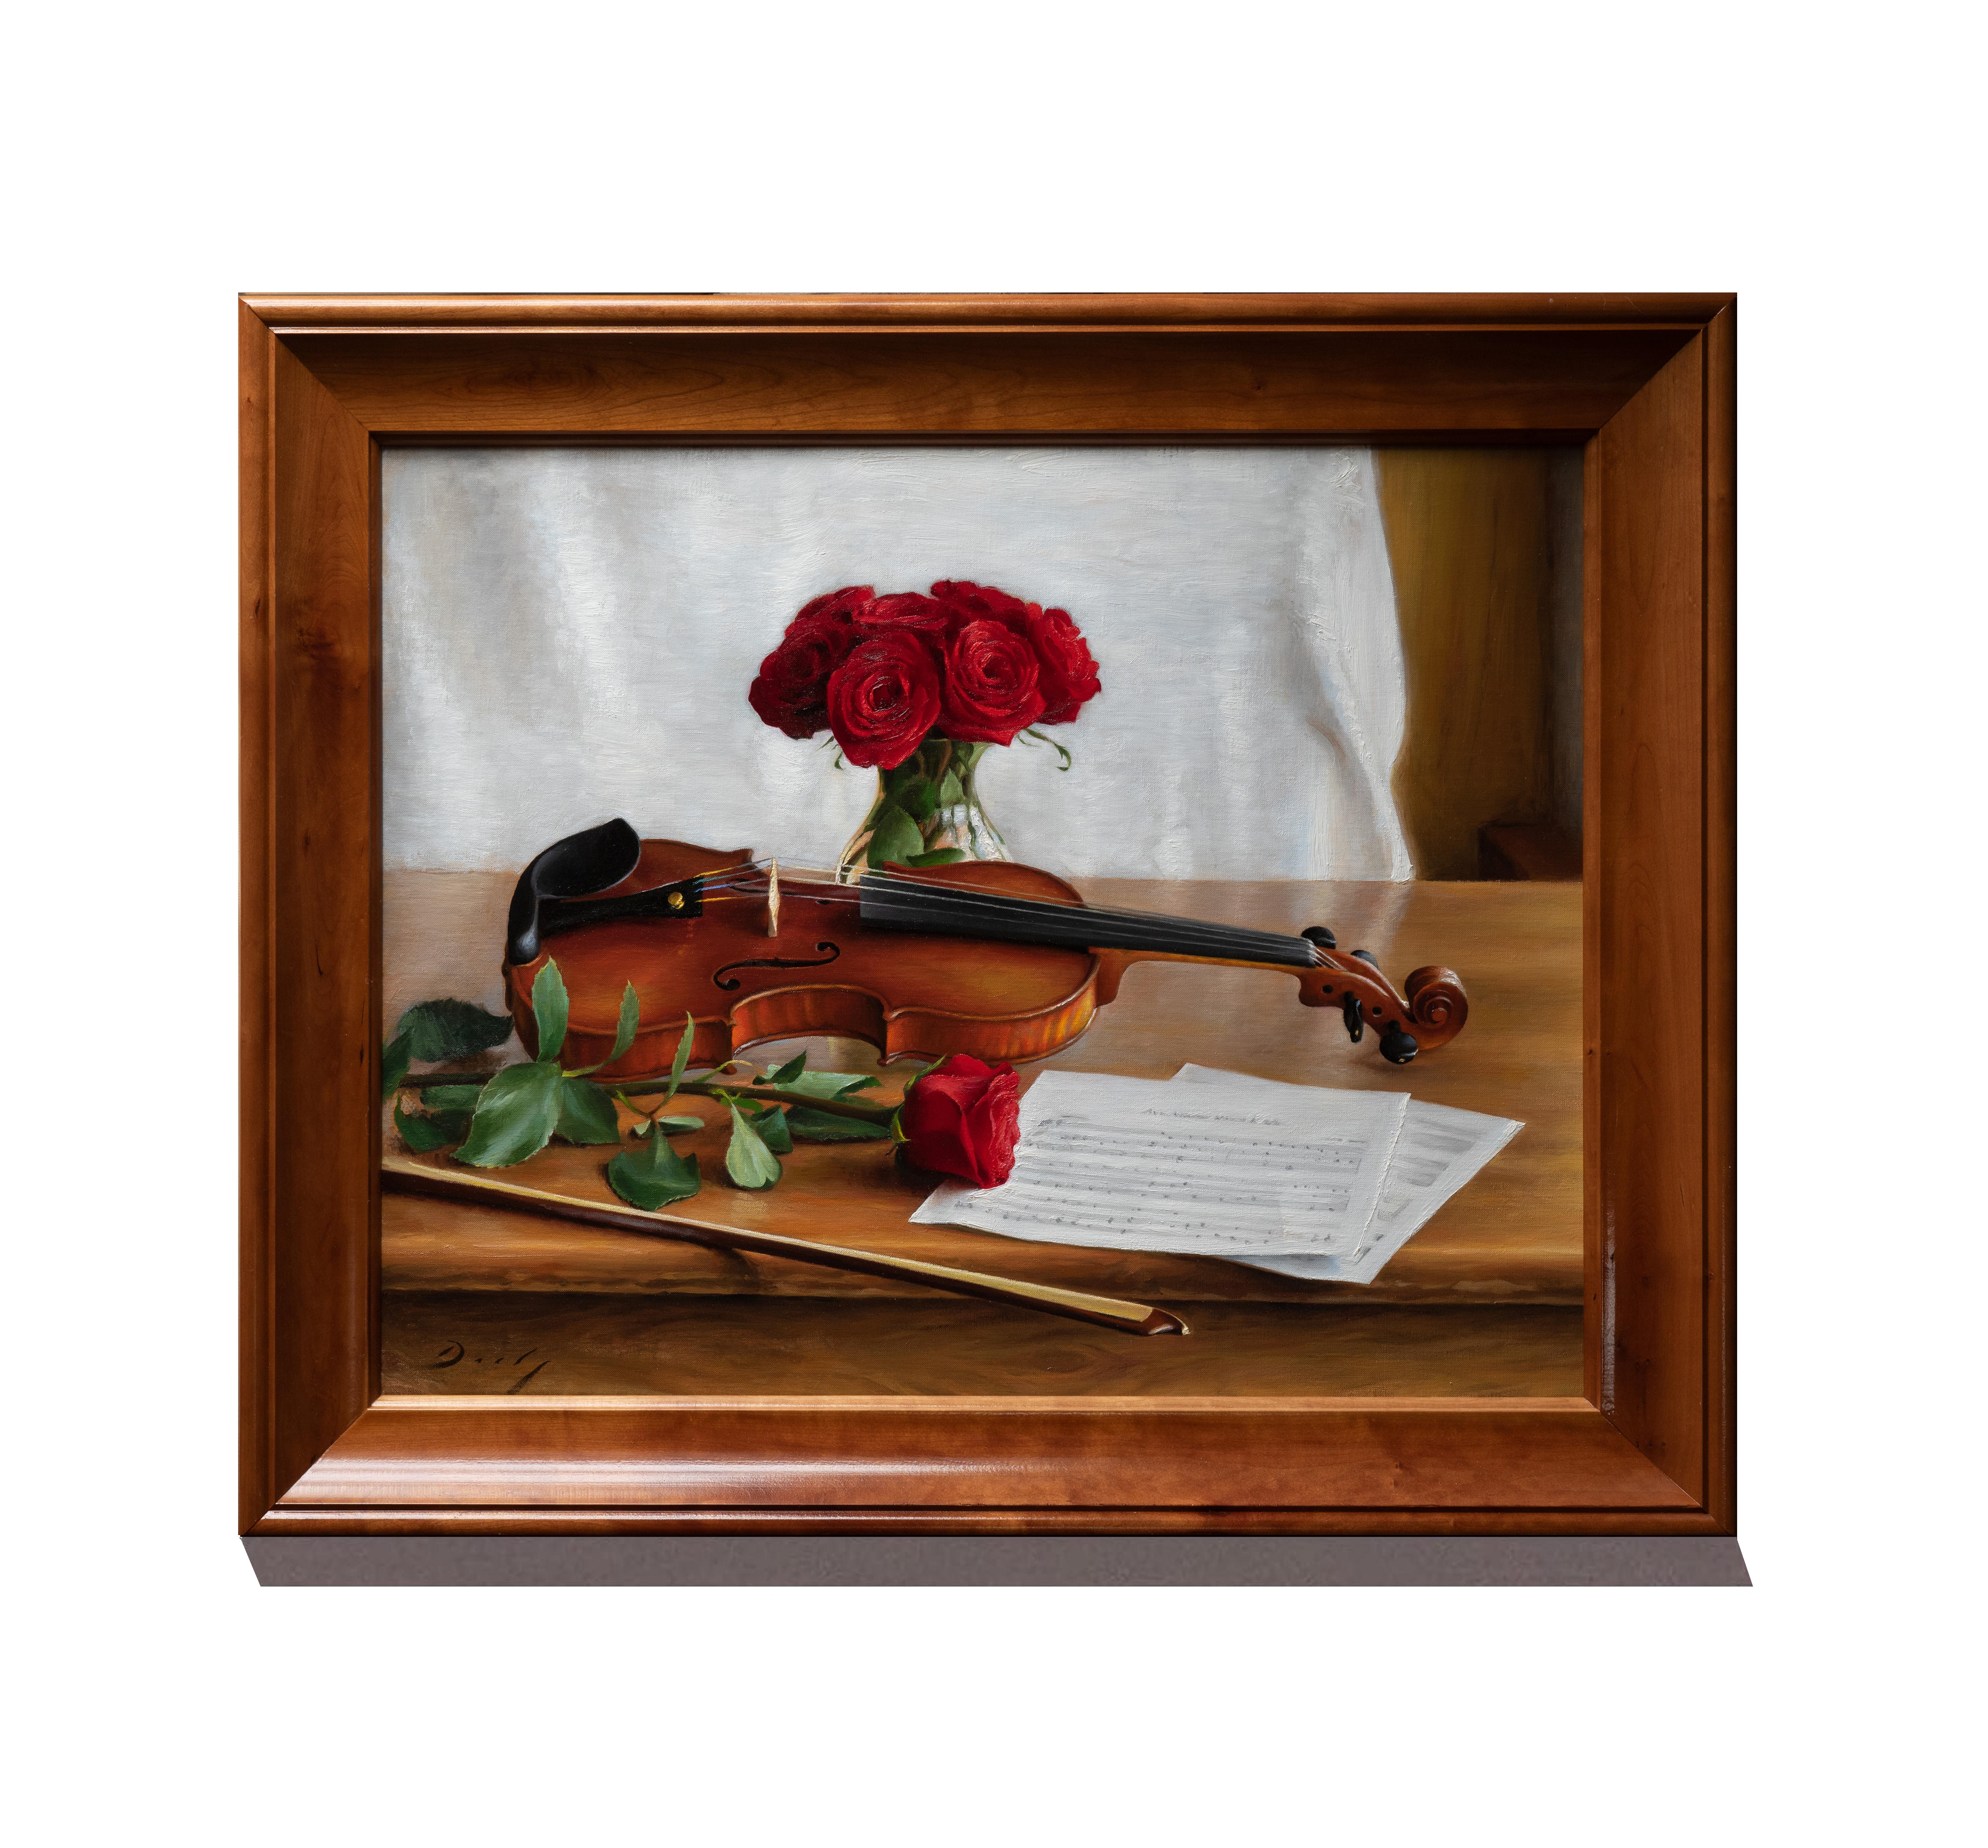 A bouquet of red roses sits on a wooden table accompanied by a beautifully rendered violin.  Laying next to the violin is a single red rose with it’s green stem and leaves delicately painted.  The violin’s bow is placed at a stronger diagonal with